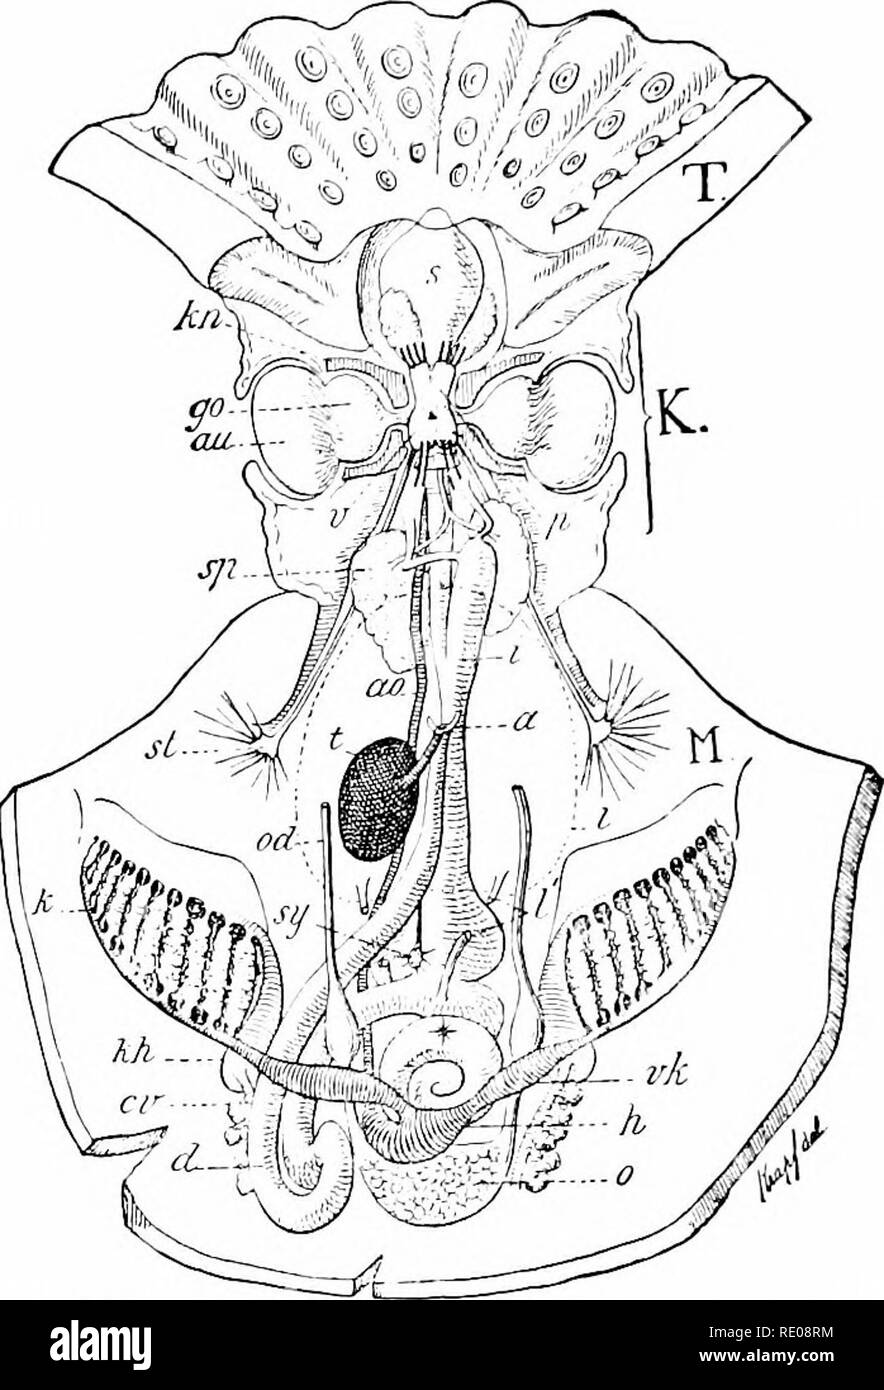 . A manual of zoology. Zoology. 390 MOLLUSC A.. Fig. 390.—Anatomy of Octopus vulgaris, a, amis; tio, aorta: ct vena cava with ne- phi'idial appendage ; rf, intestine ; go, optic ganglion ; /i, S3'stemic lieart; (. nrop ; K, head ; k, ctenidia ; kli, branchial heart; kn, cartilage; /, (', liver and gall duct, the liver indicated by dotted line; il/, mantle; o, ovary ; od, oviduct; p. pedal ganglion ; s buccal mass with salivary glands; st, stellate ganglion ; sy, stomach and sympathetic ganglion ; T, basis of tentacles ; t, ink sac ; c, visceral ganglion: vk, auricle of systemic heart; *, spir Stock Photo